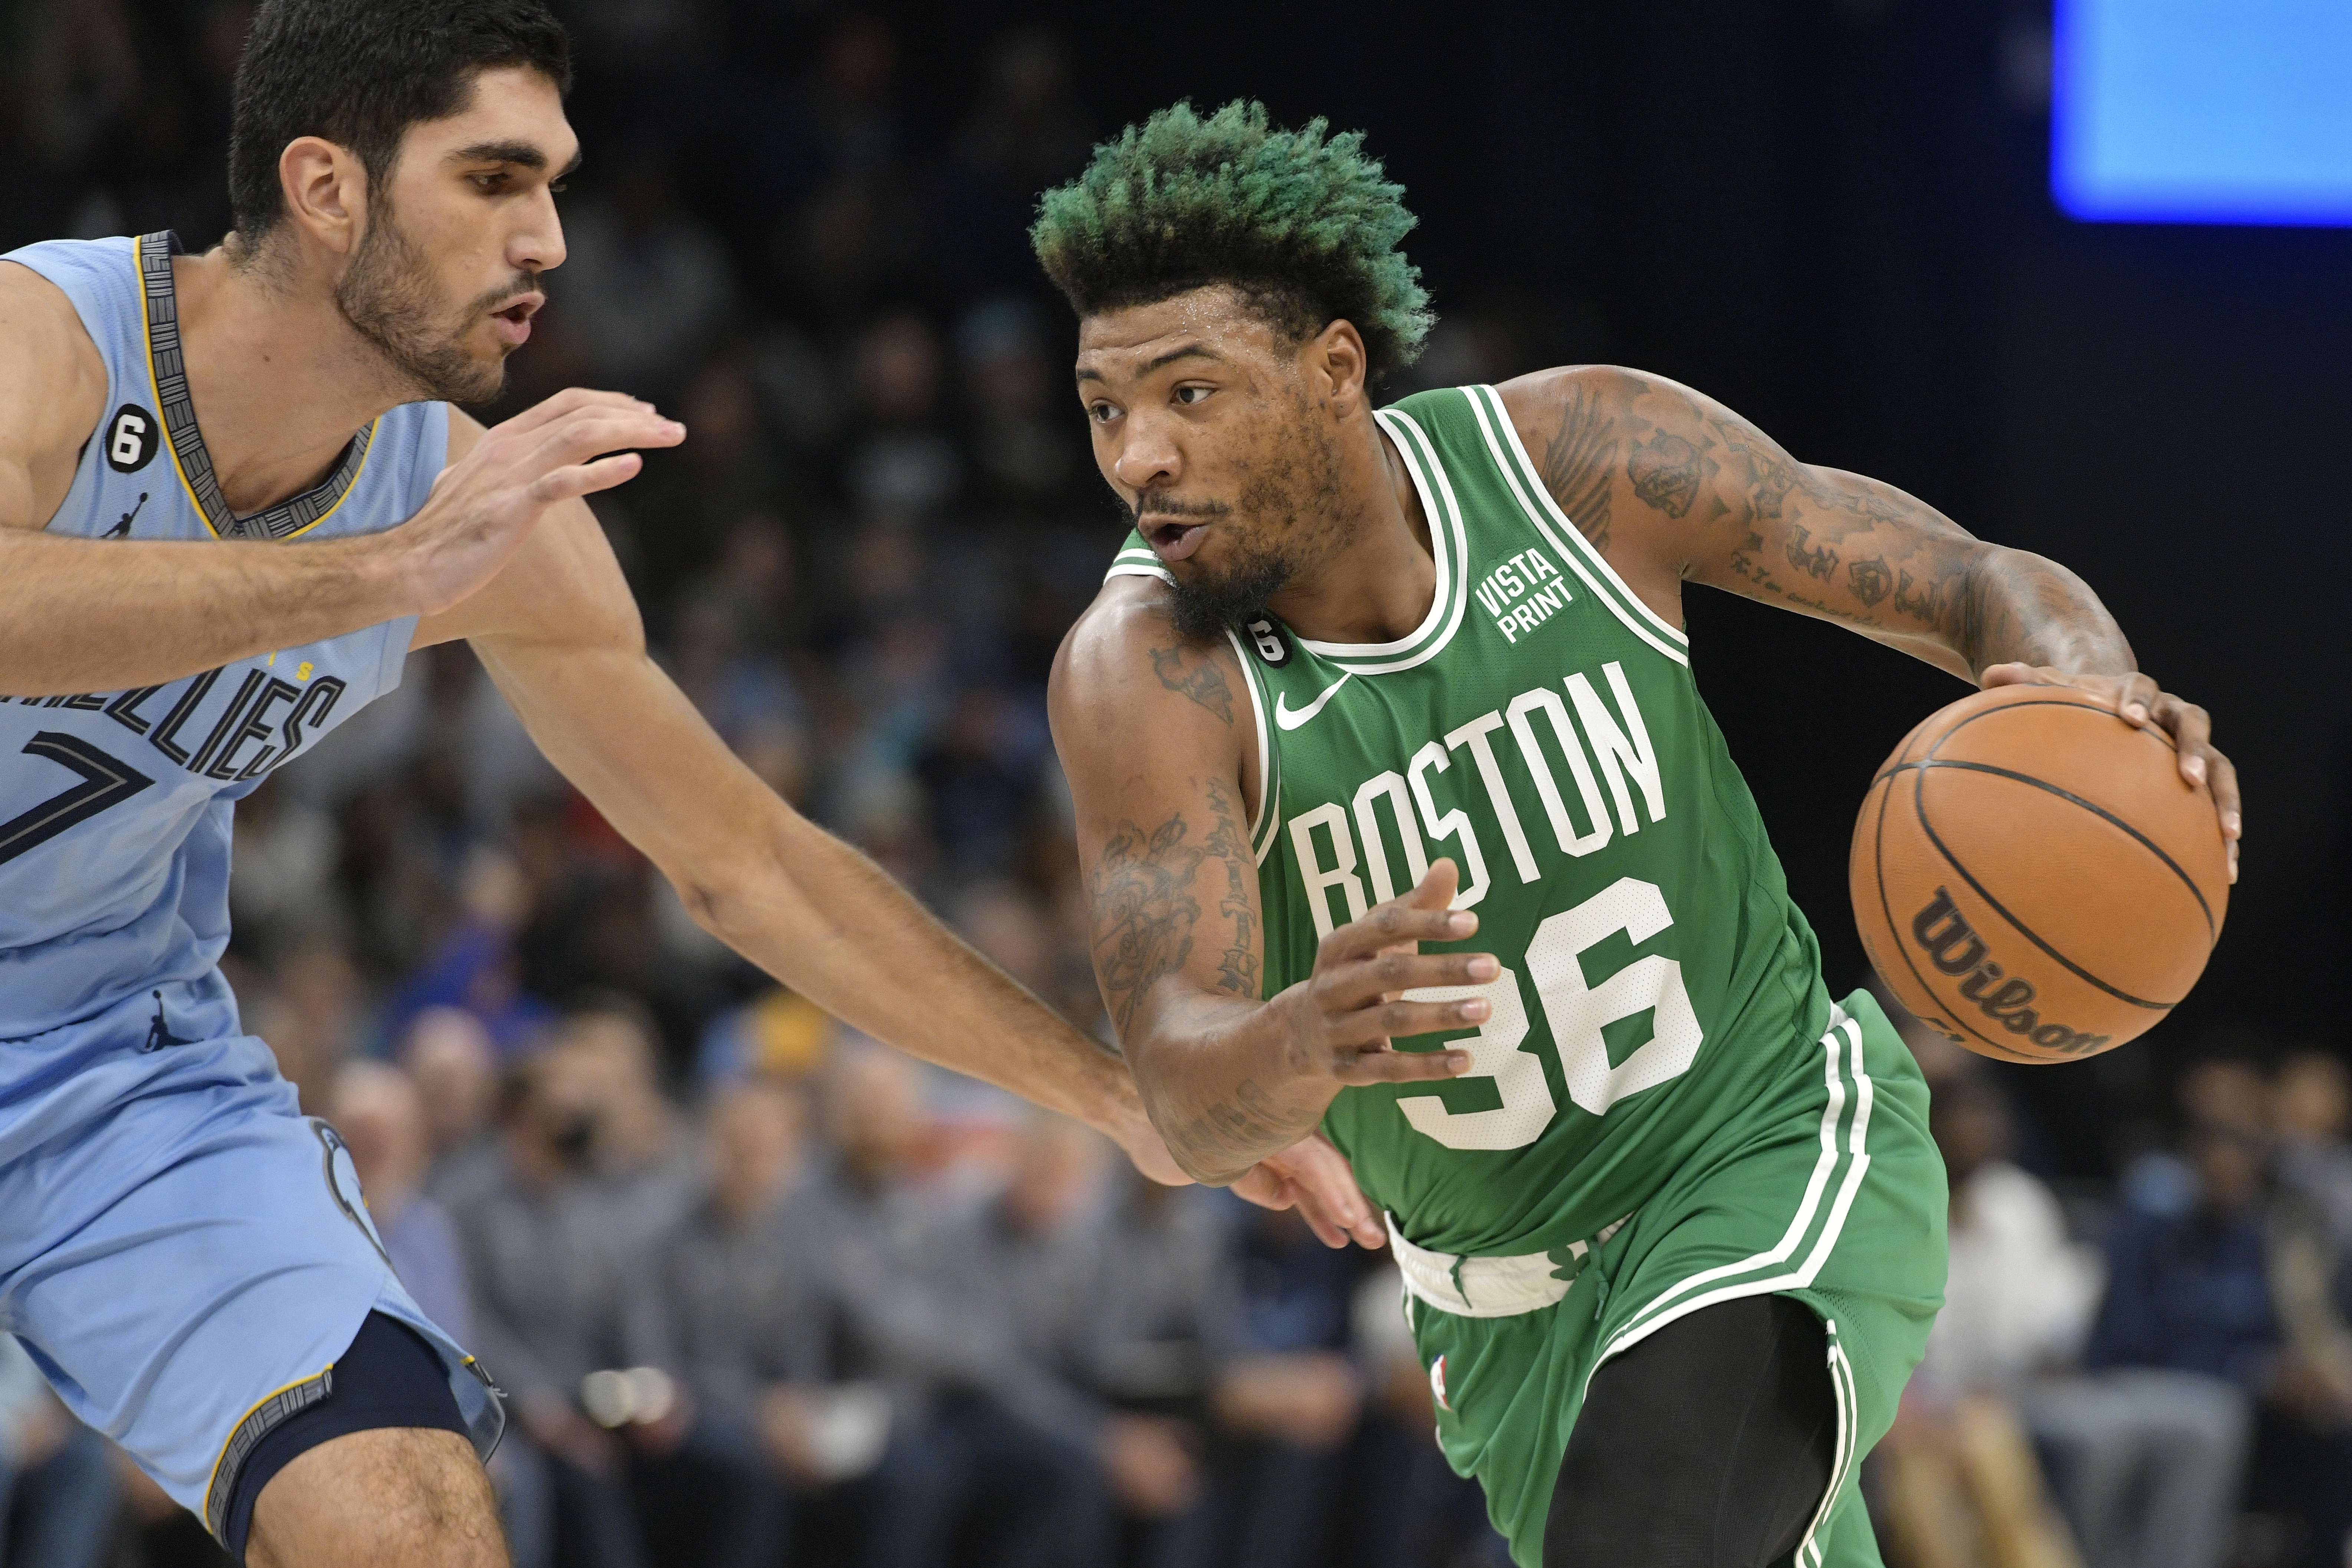 Marcus Smart is marveling at the Grizzlies' defensive mindset. He